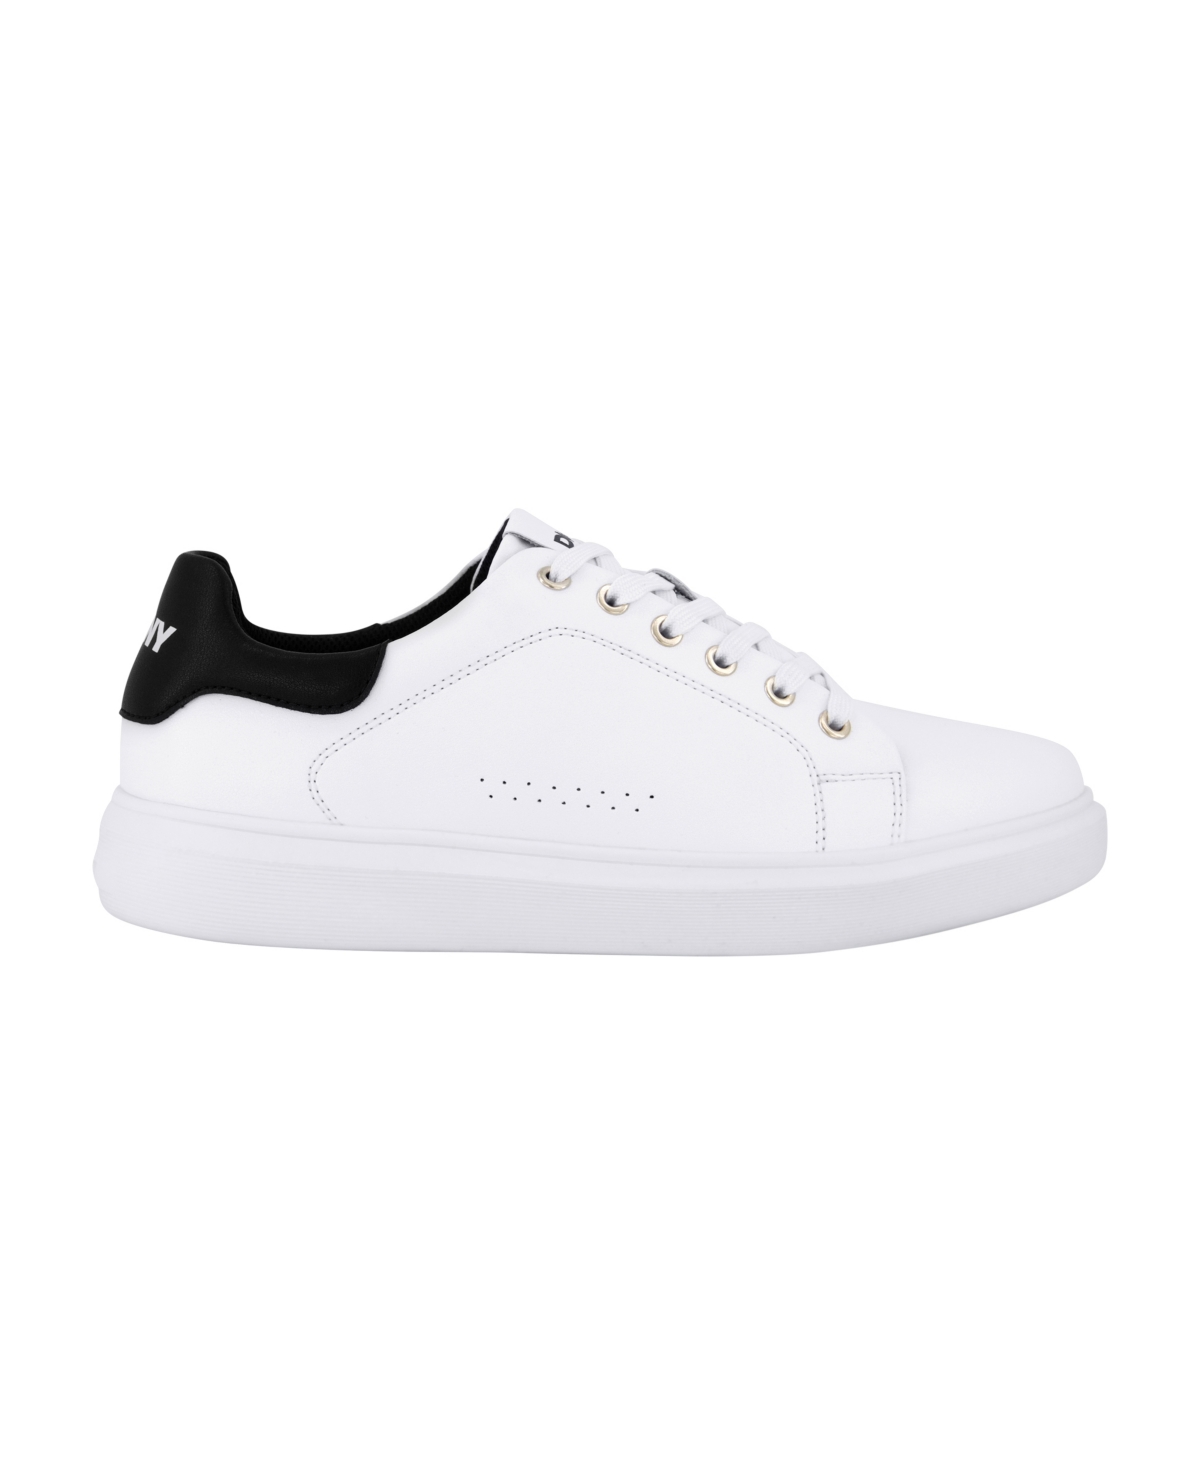 Shop Dkny Men's Smooth Leather Sneakers In Black